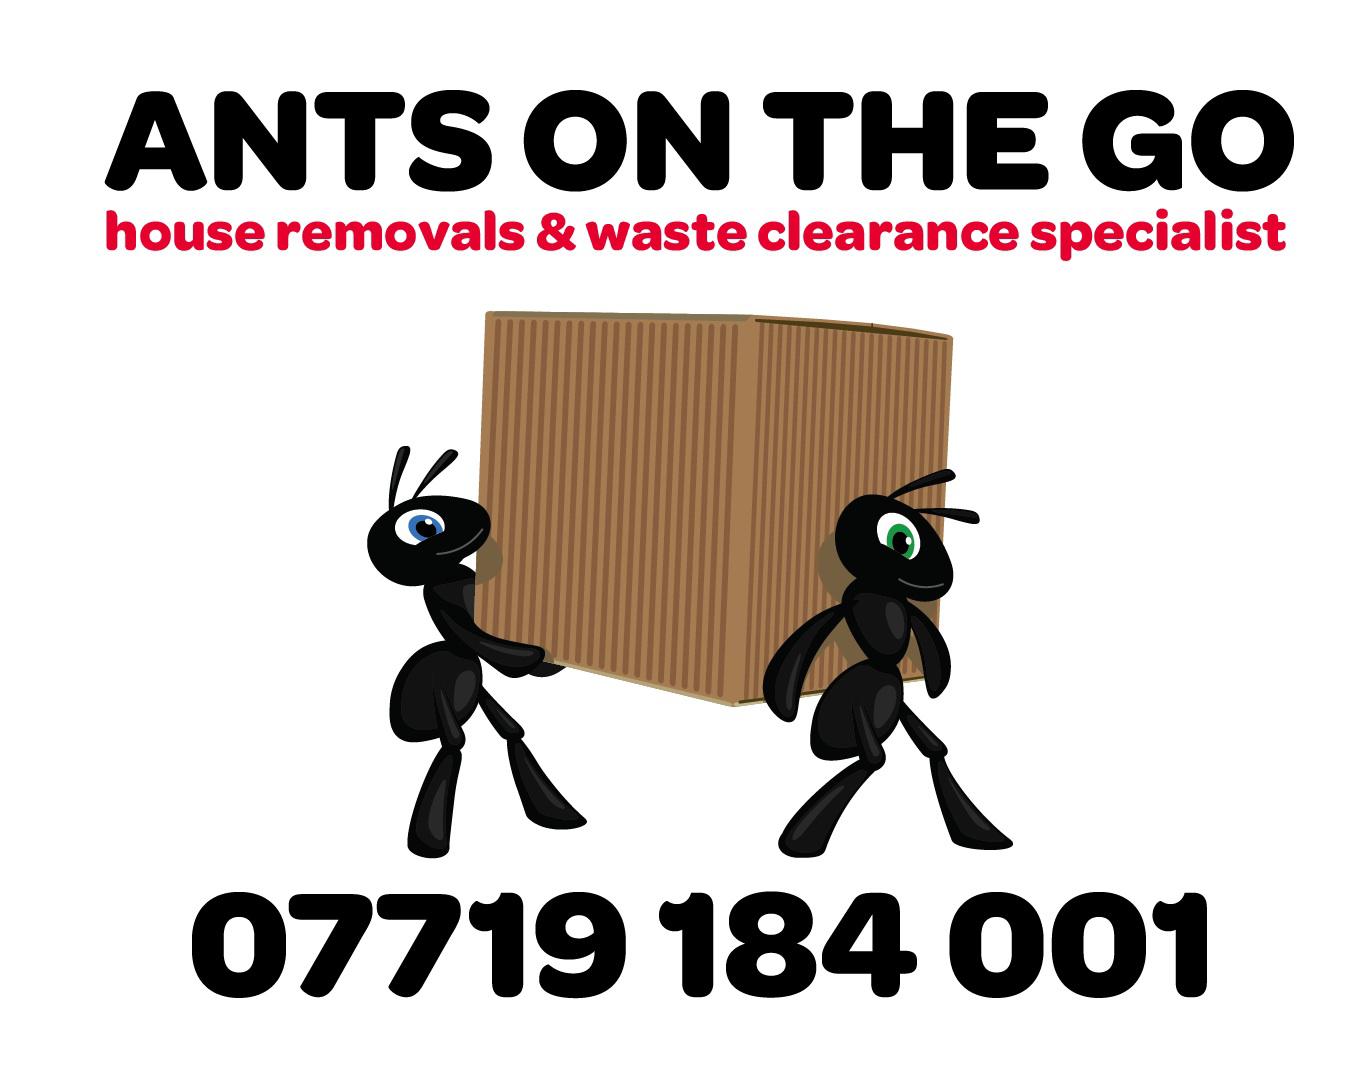 Ants on the Go House Removals and Waste Clearance Specialist